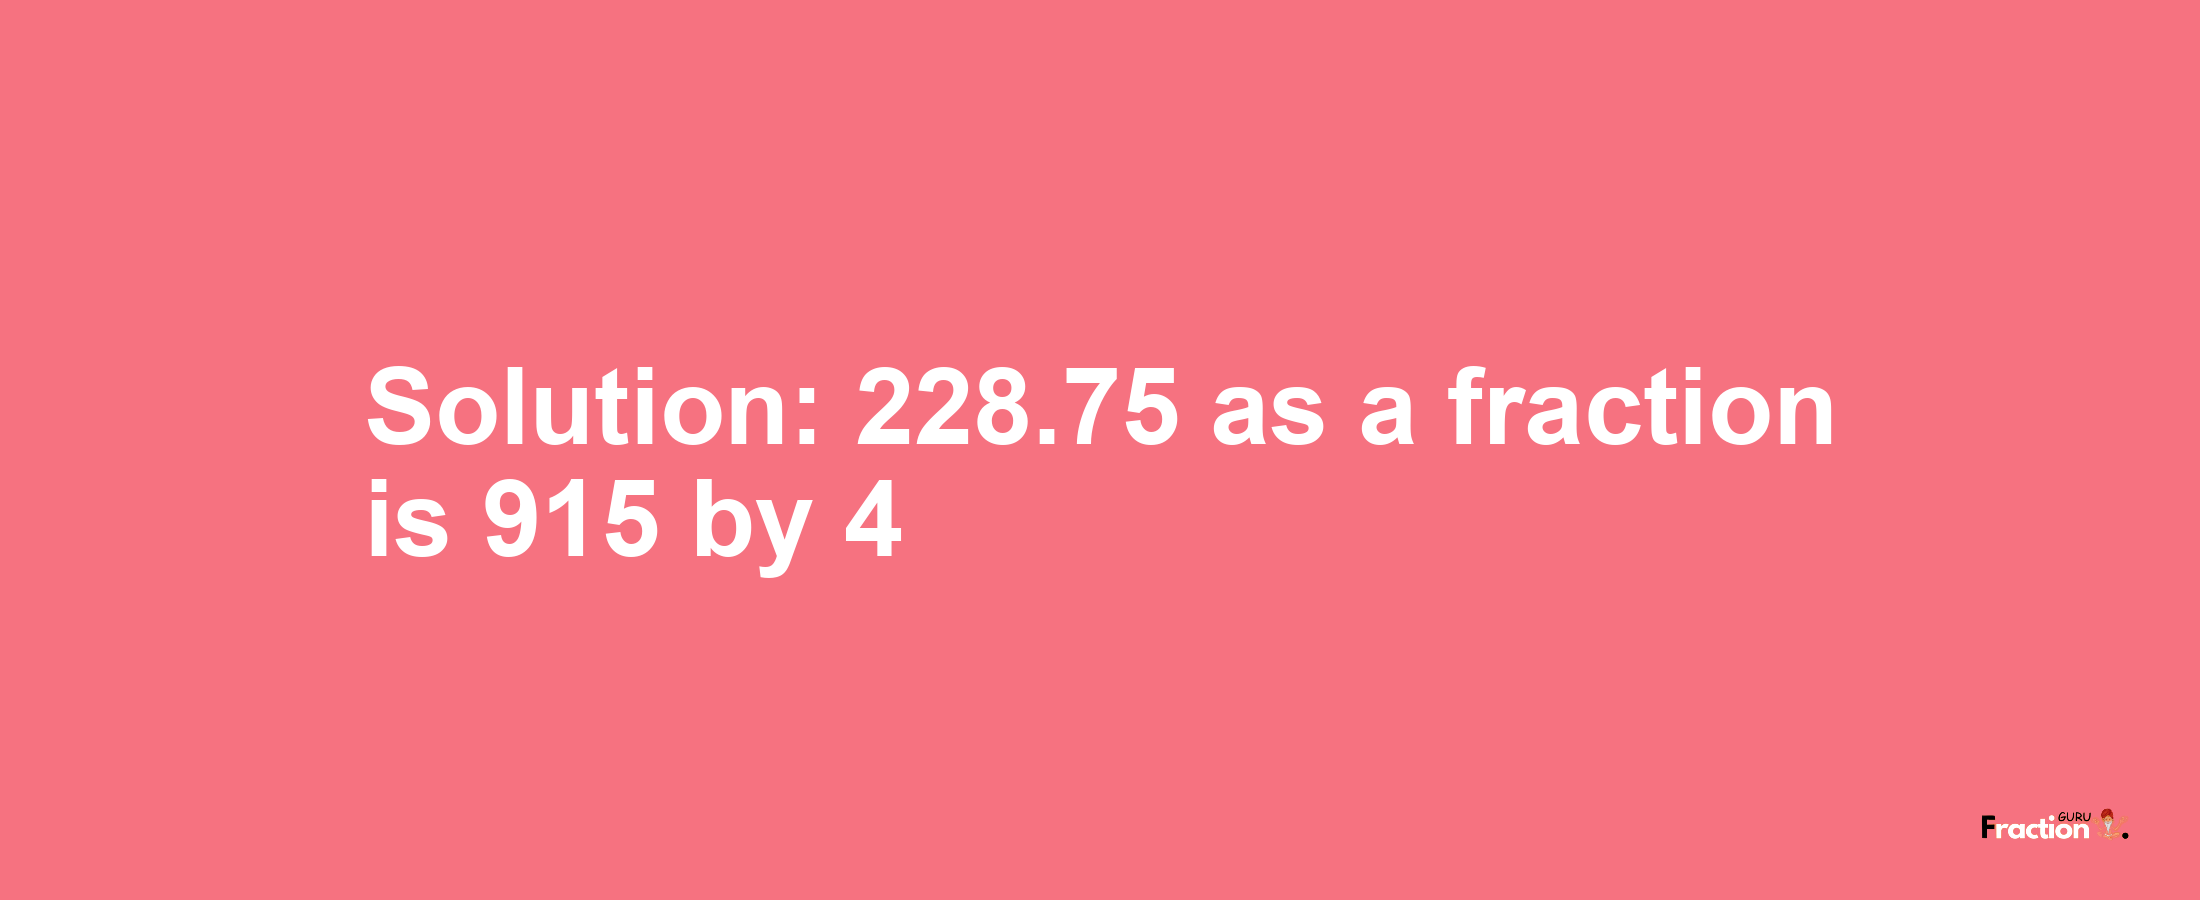 Solution:228.75 as a fraction is 915/4